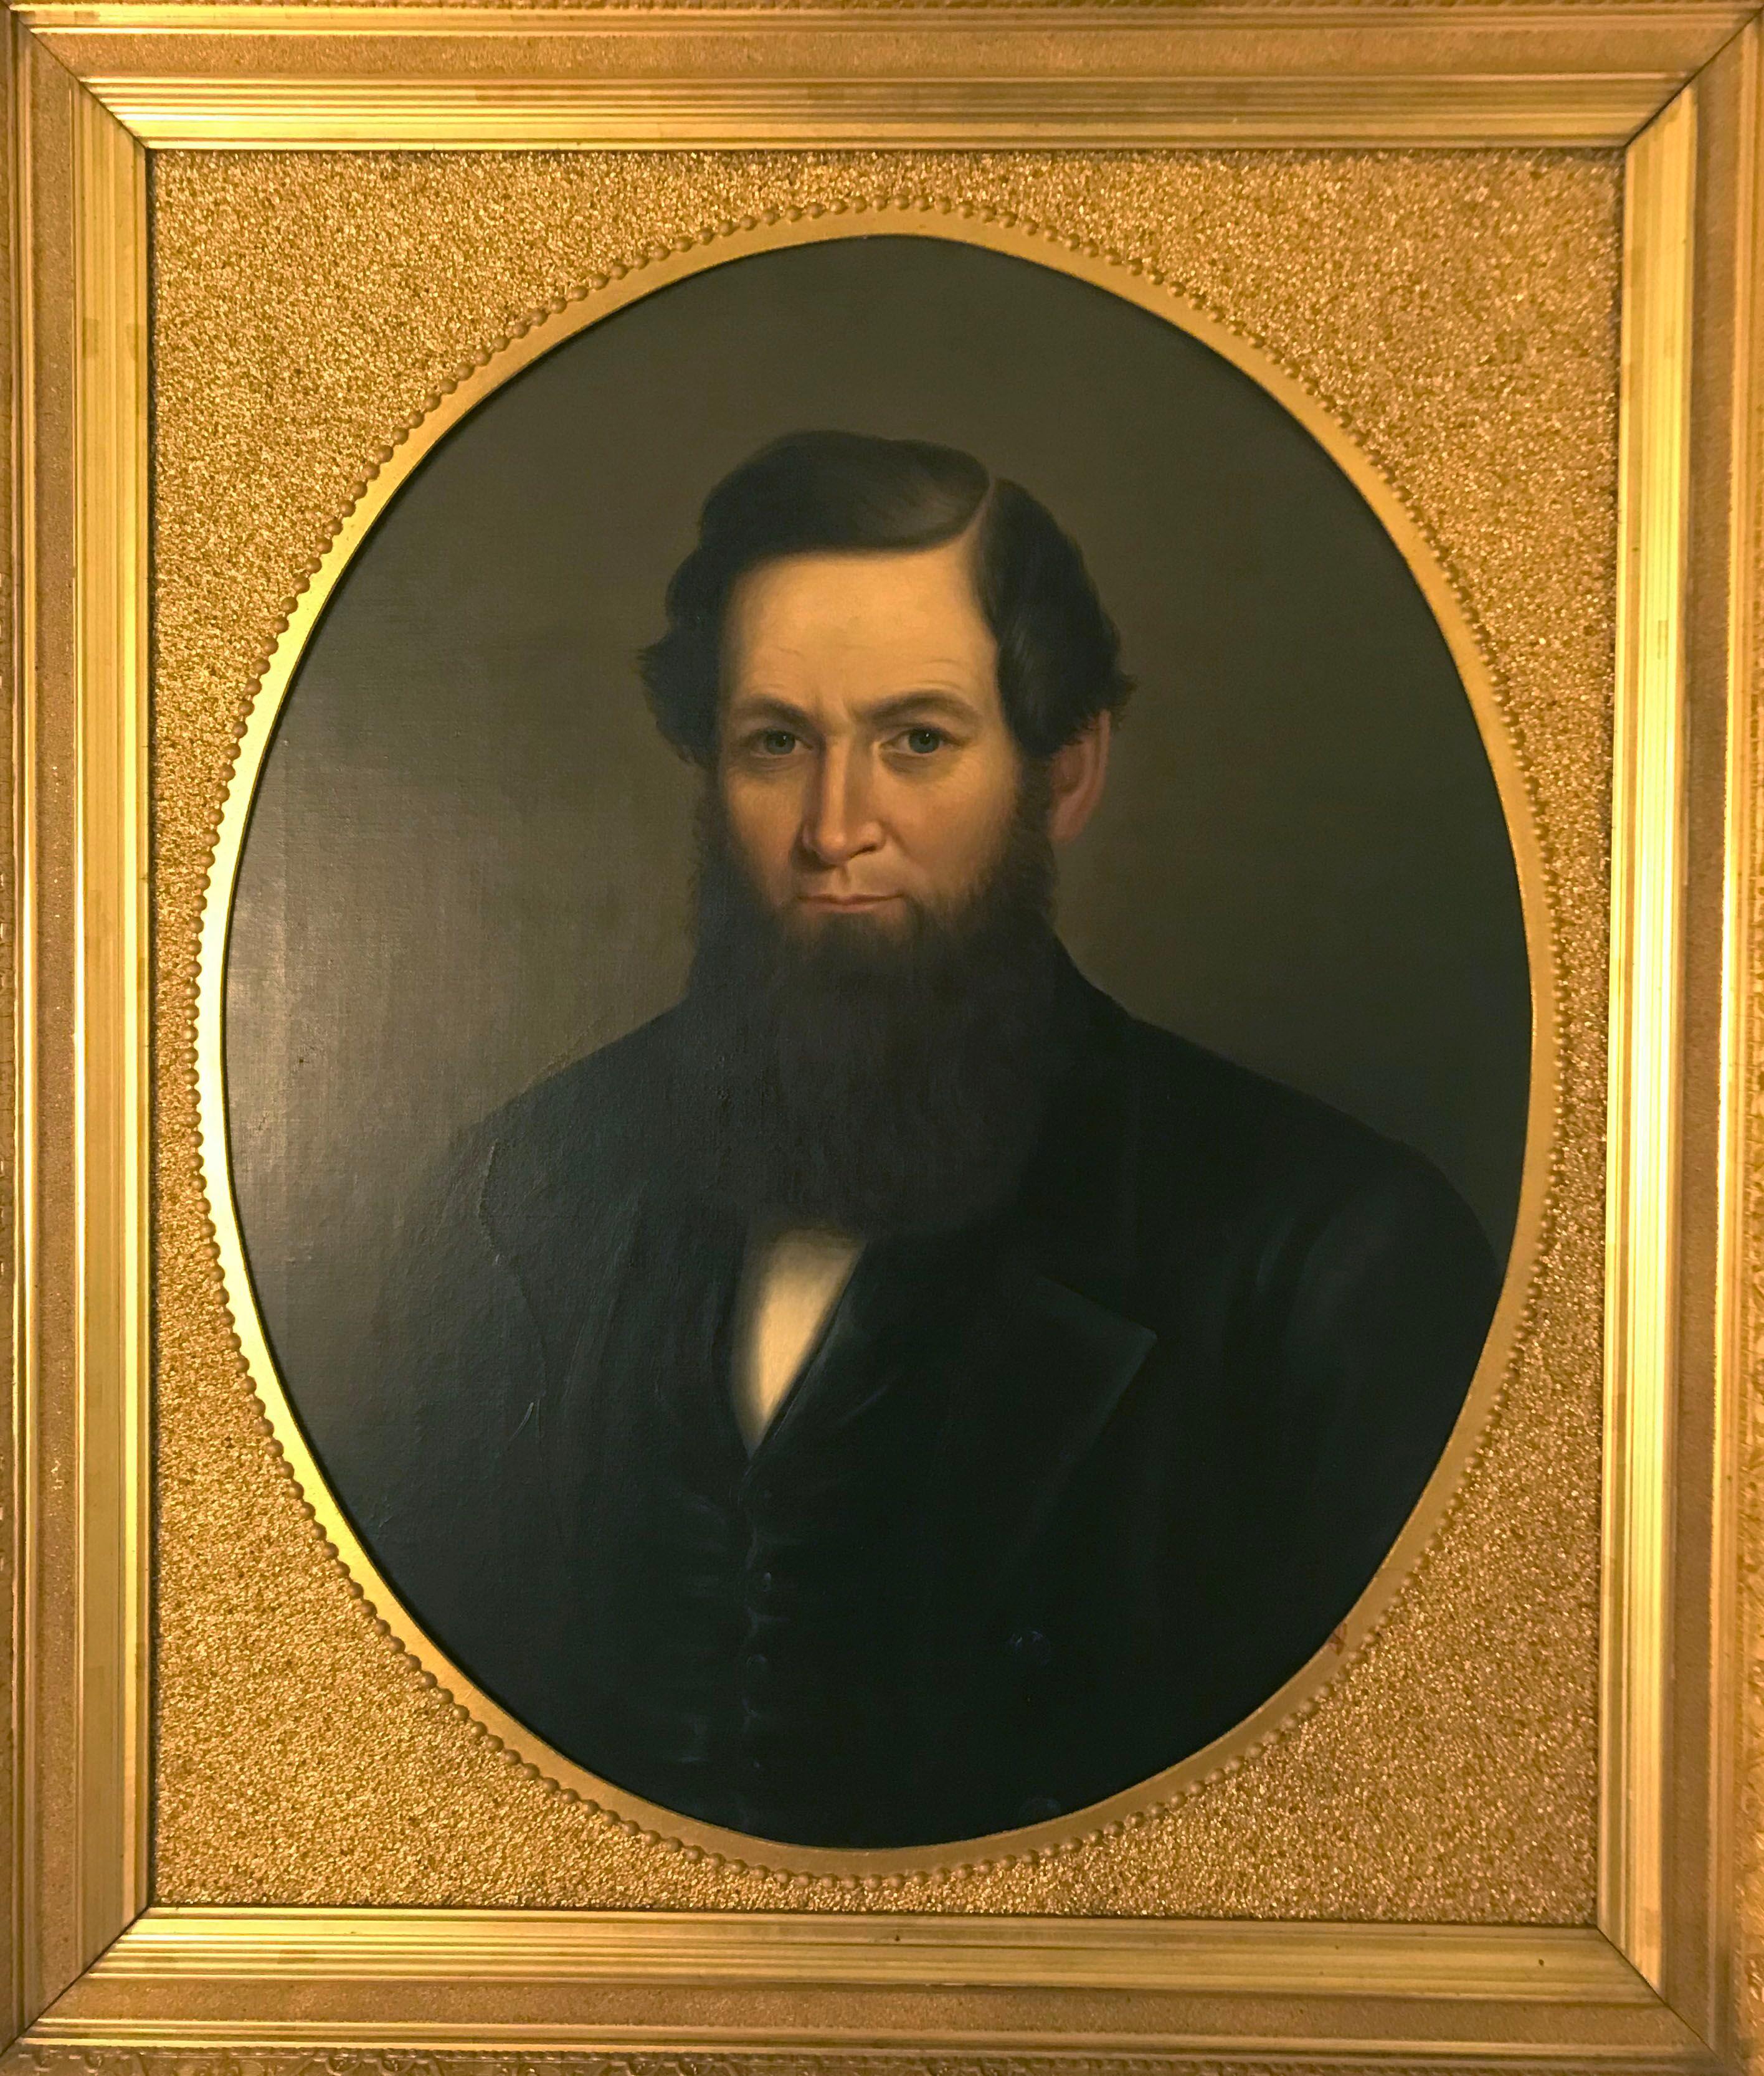 American Classical 19th Century American Portrait Painting Of A Man In A Gilded Frame